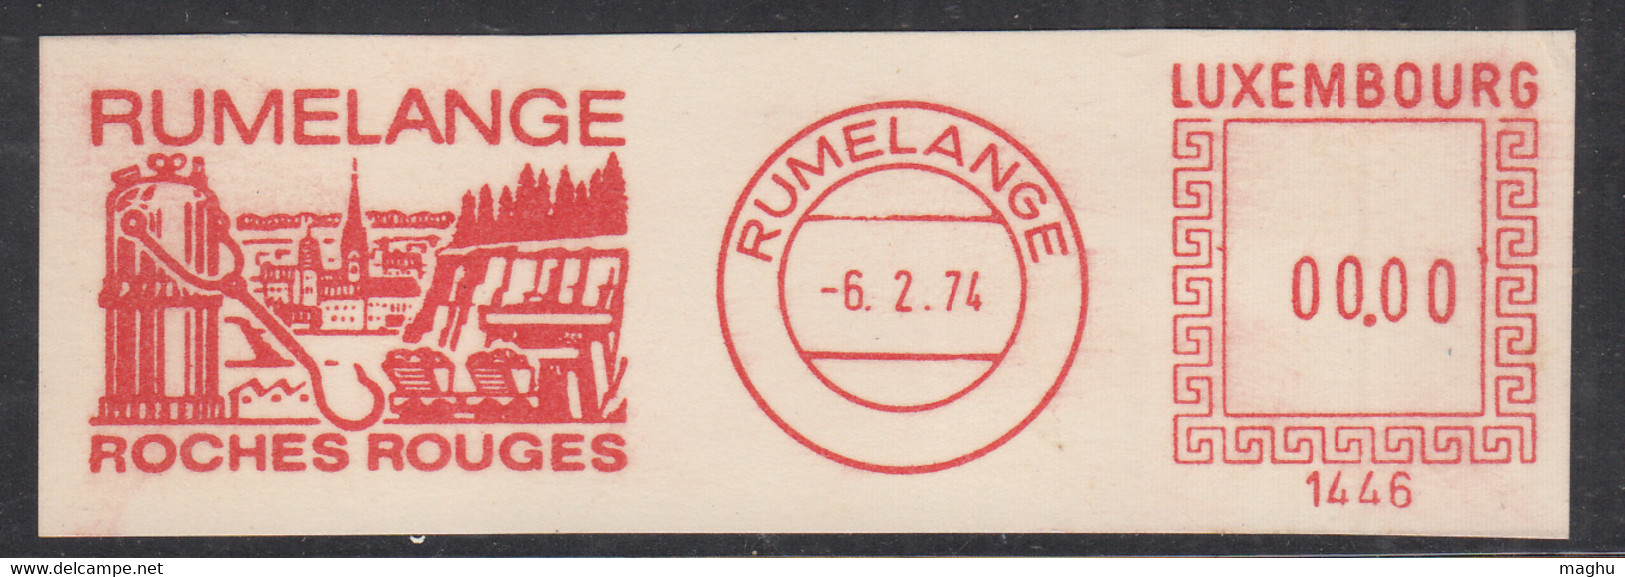 00.00 Value, Trial Meter Cancellation?, ATM Machine Stamp, Luxemburg, Rumelange Rochhes Rouges, Mineral, Mining Tools, - Frankeermachines (EMA)